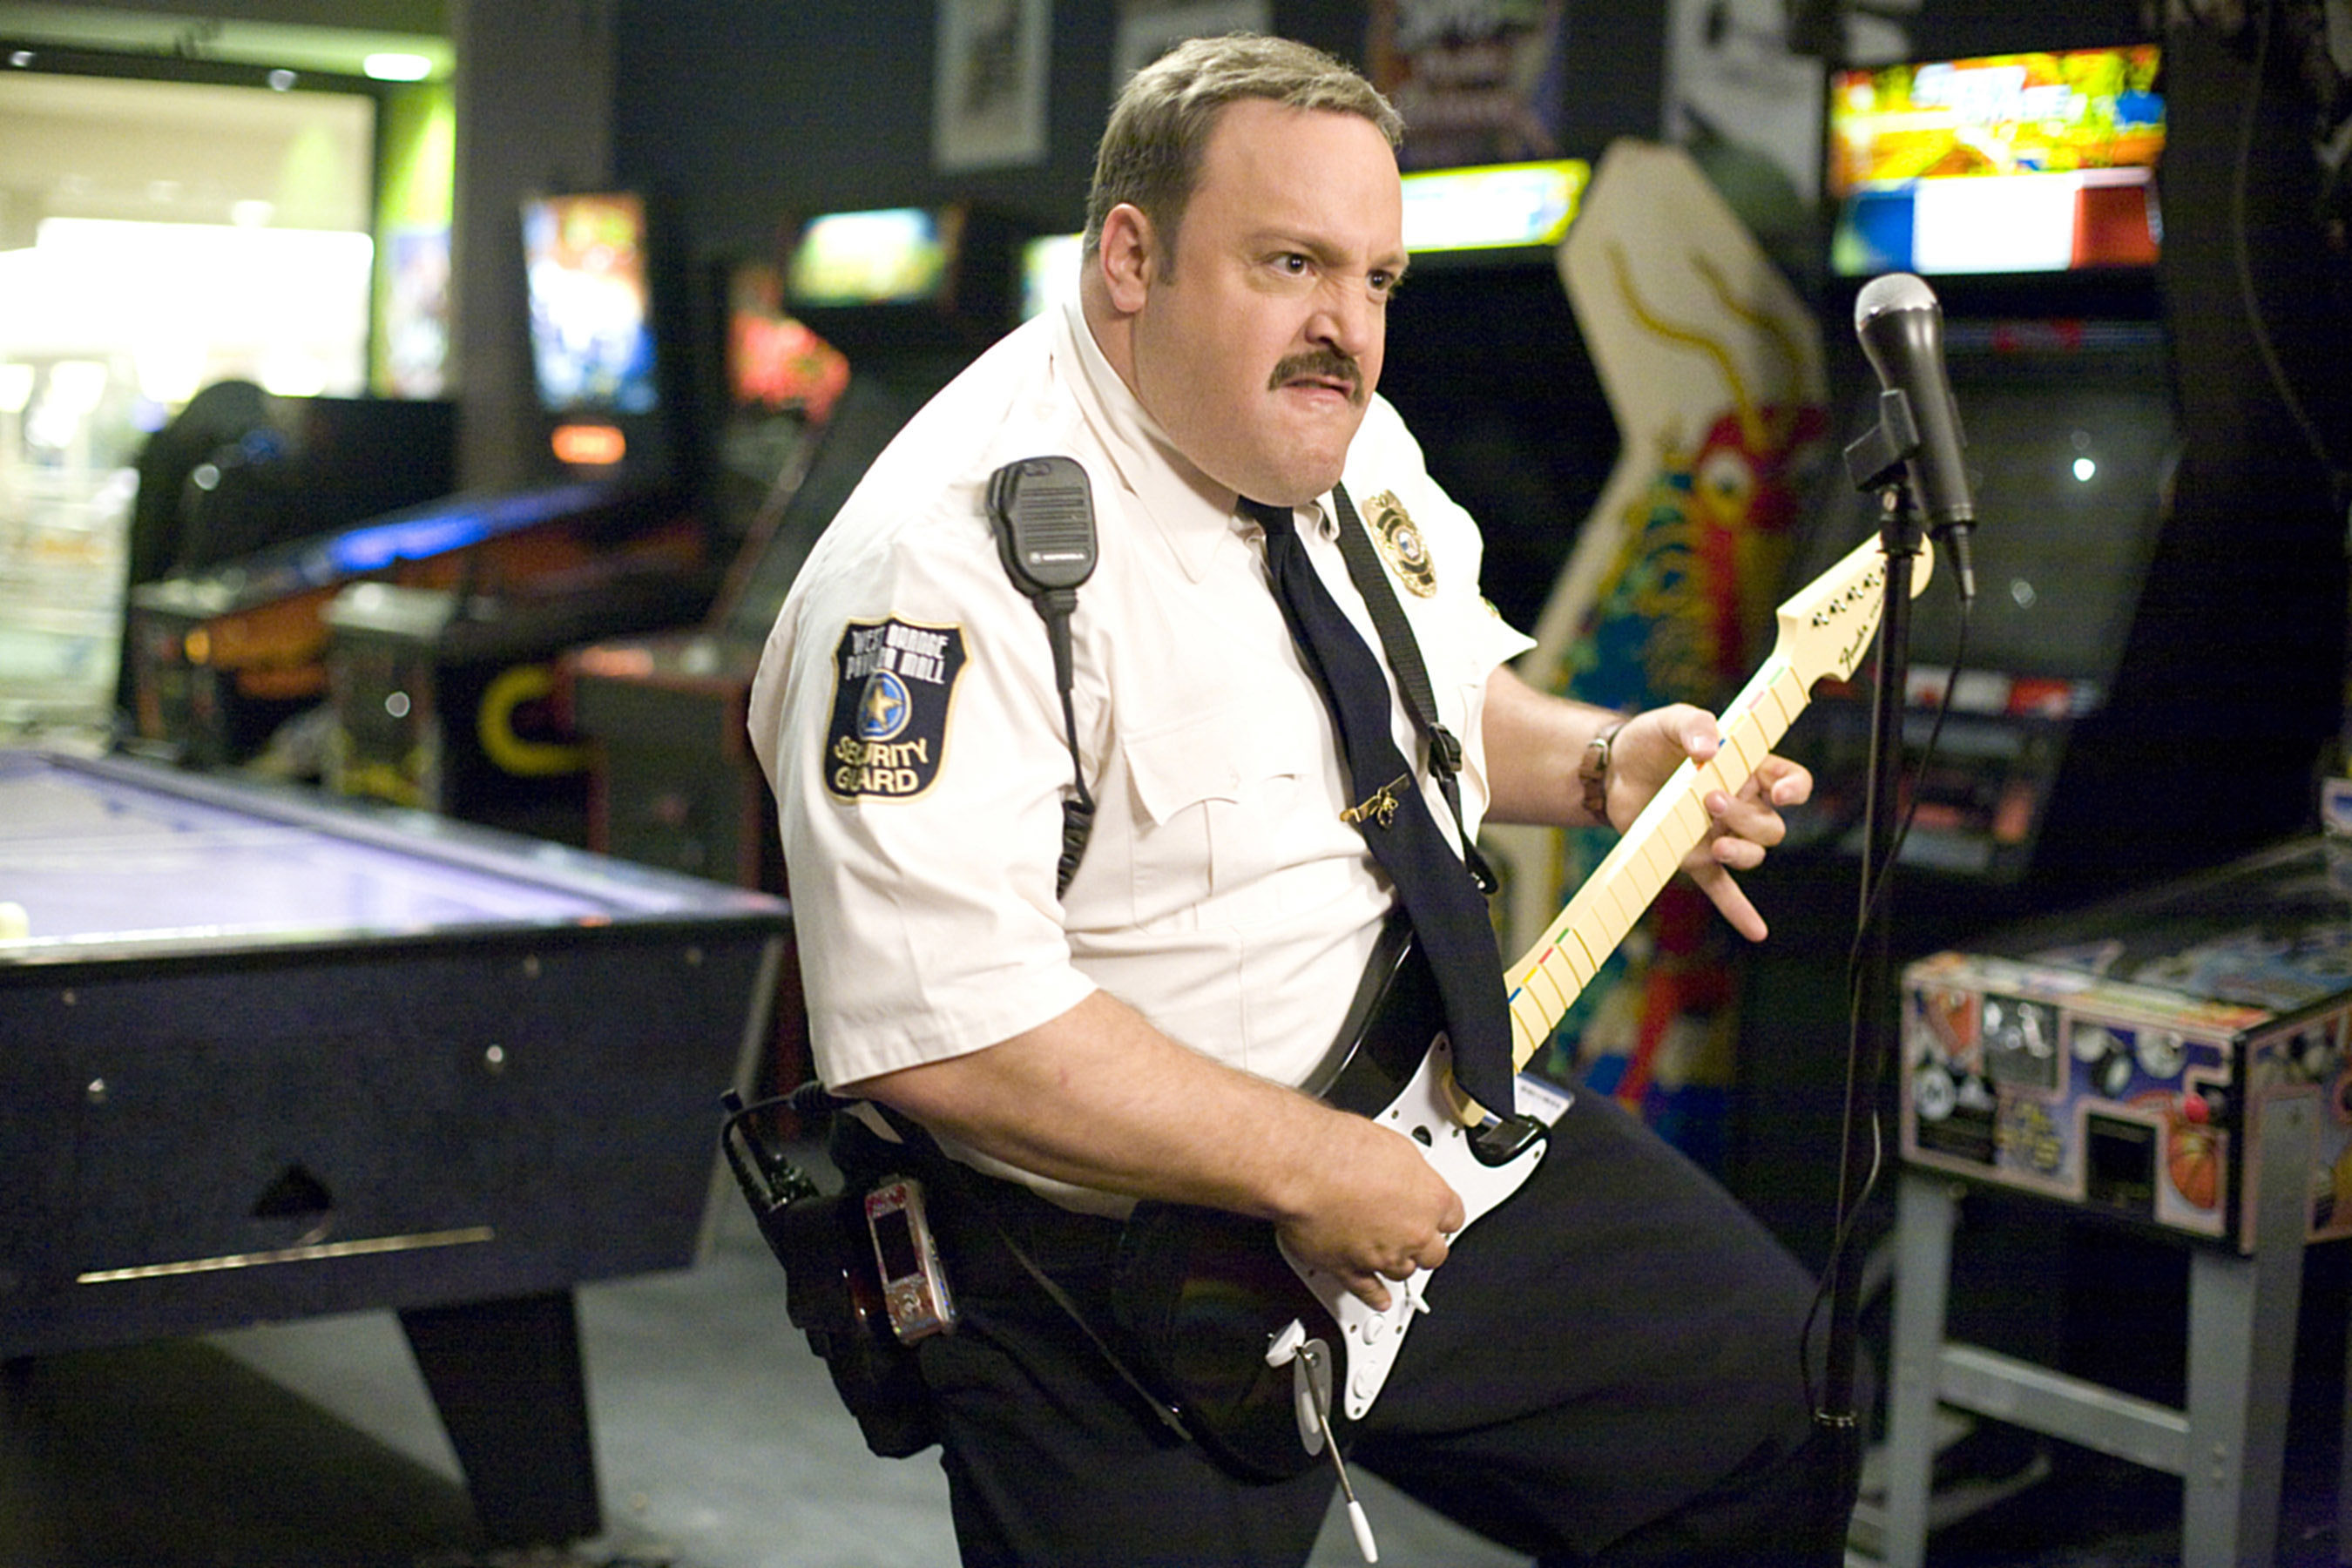 Kevin James plays Guitar Hero in a mall arcade